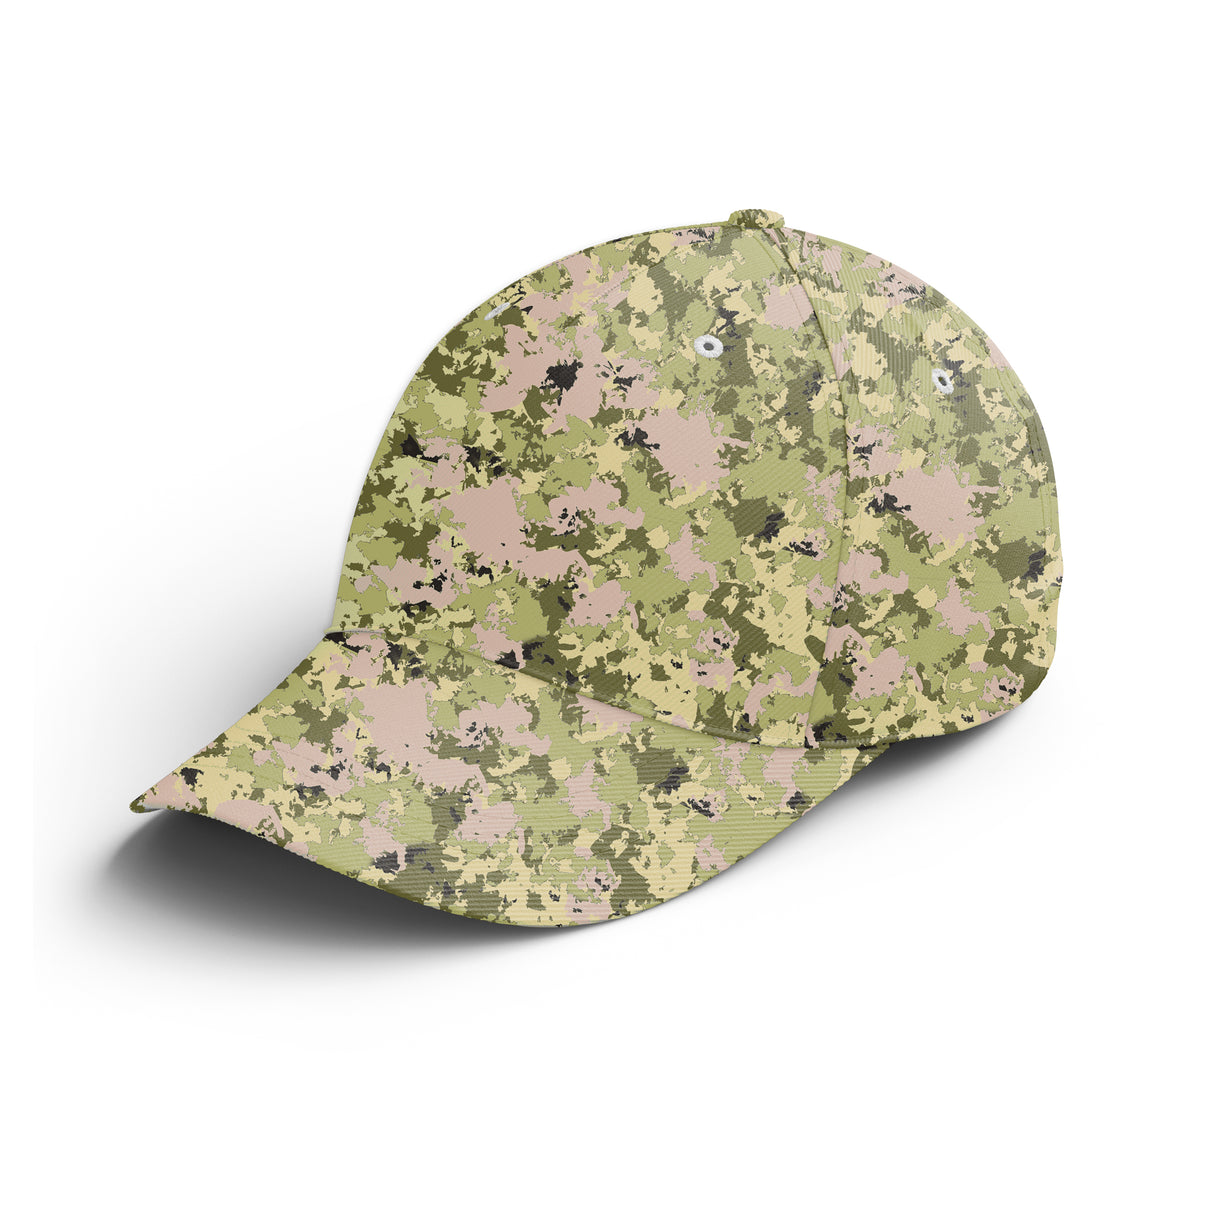 Camouflage Fishing and Hunting Cap, Original Gift for Fisherman and Hunter - CT23072212